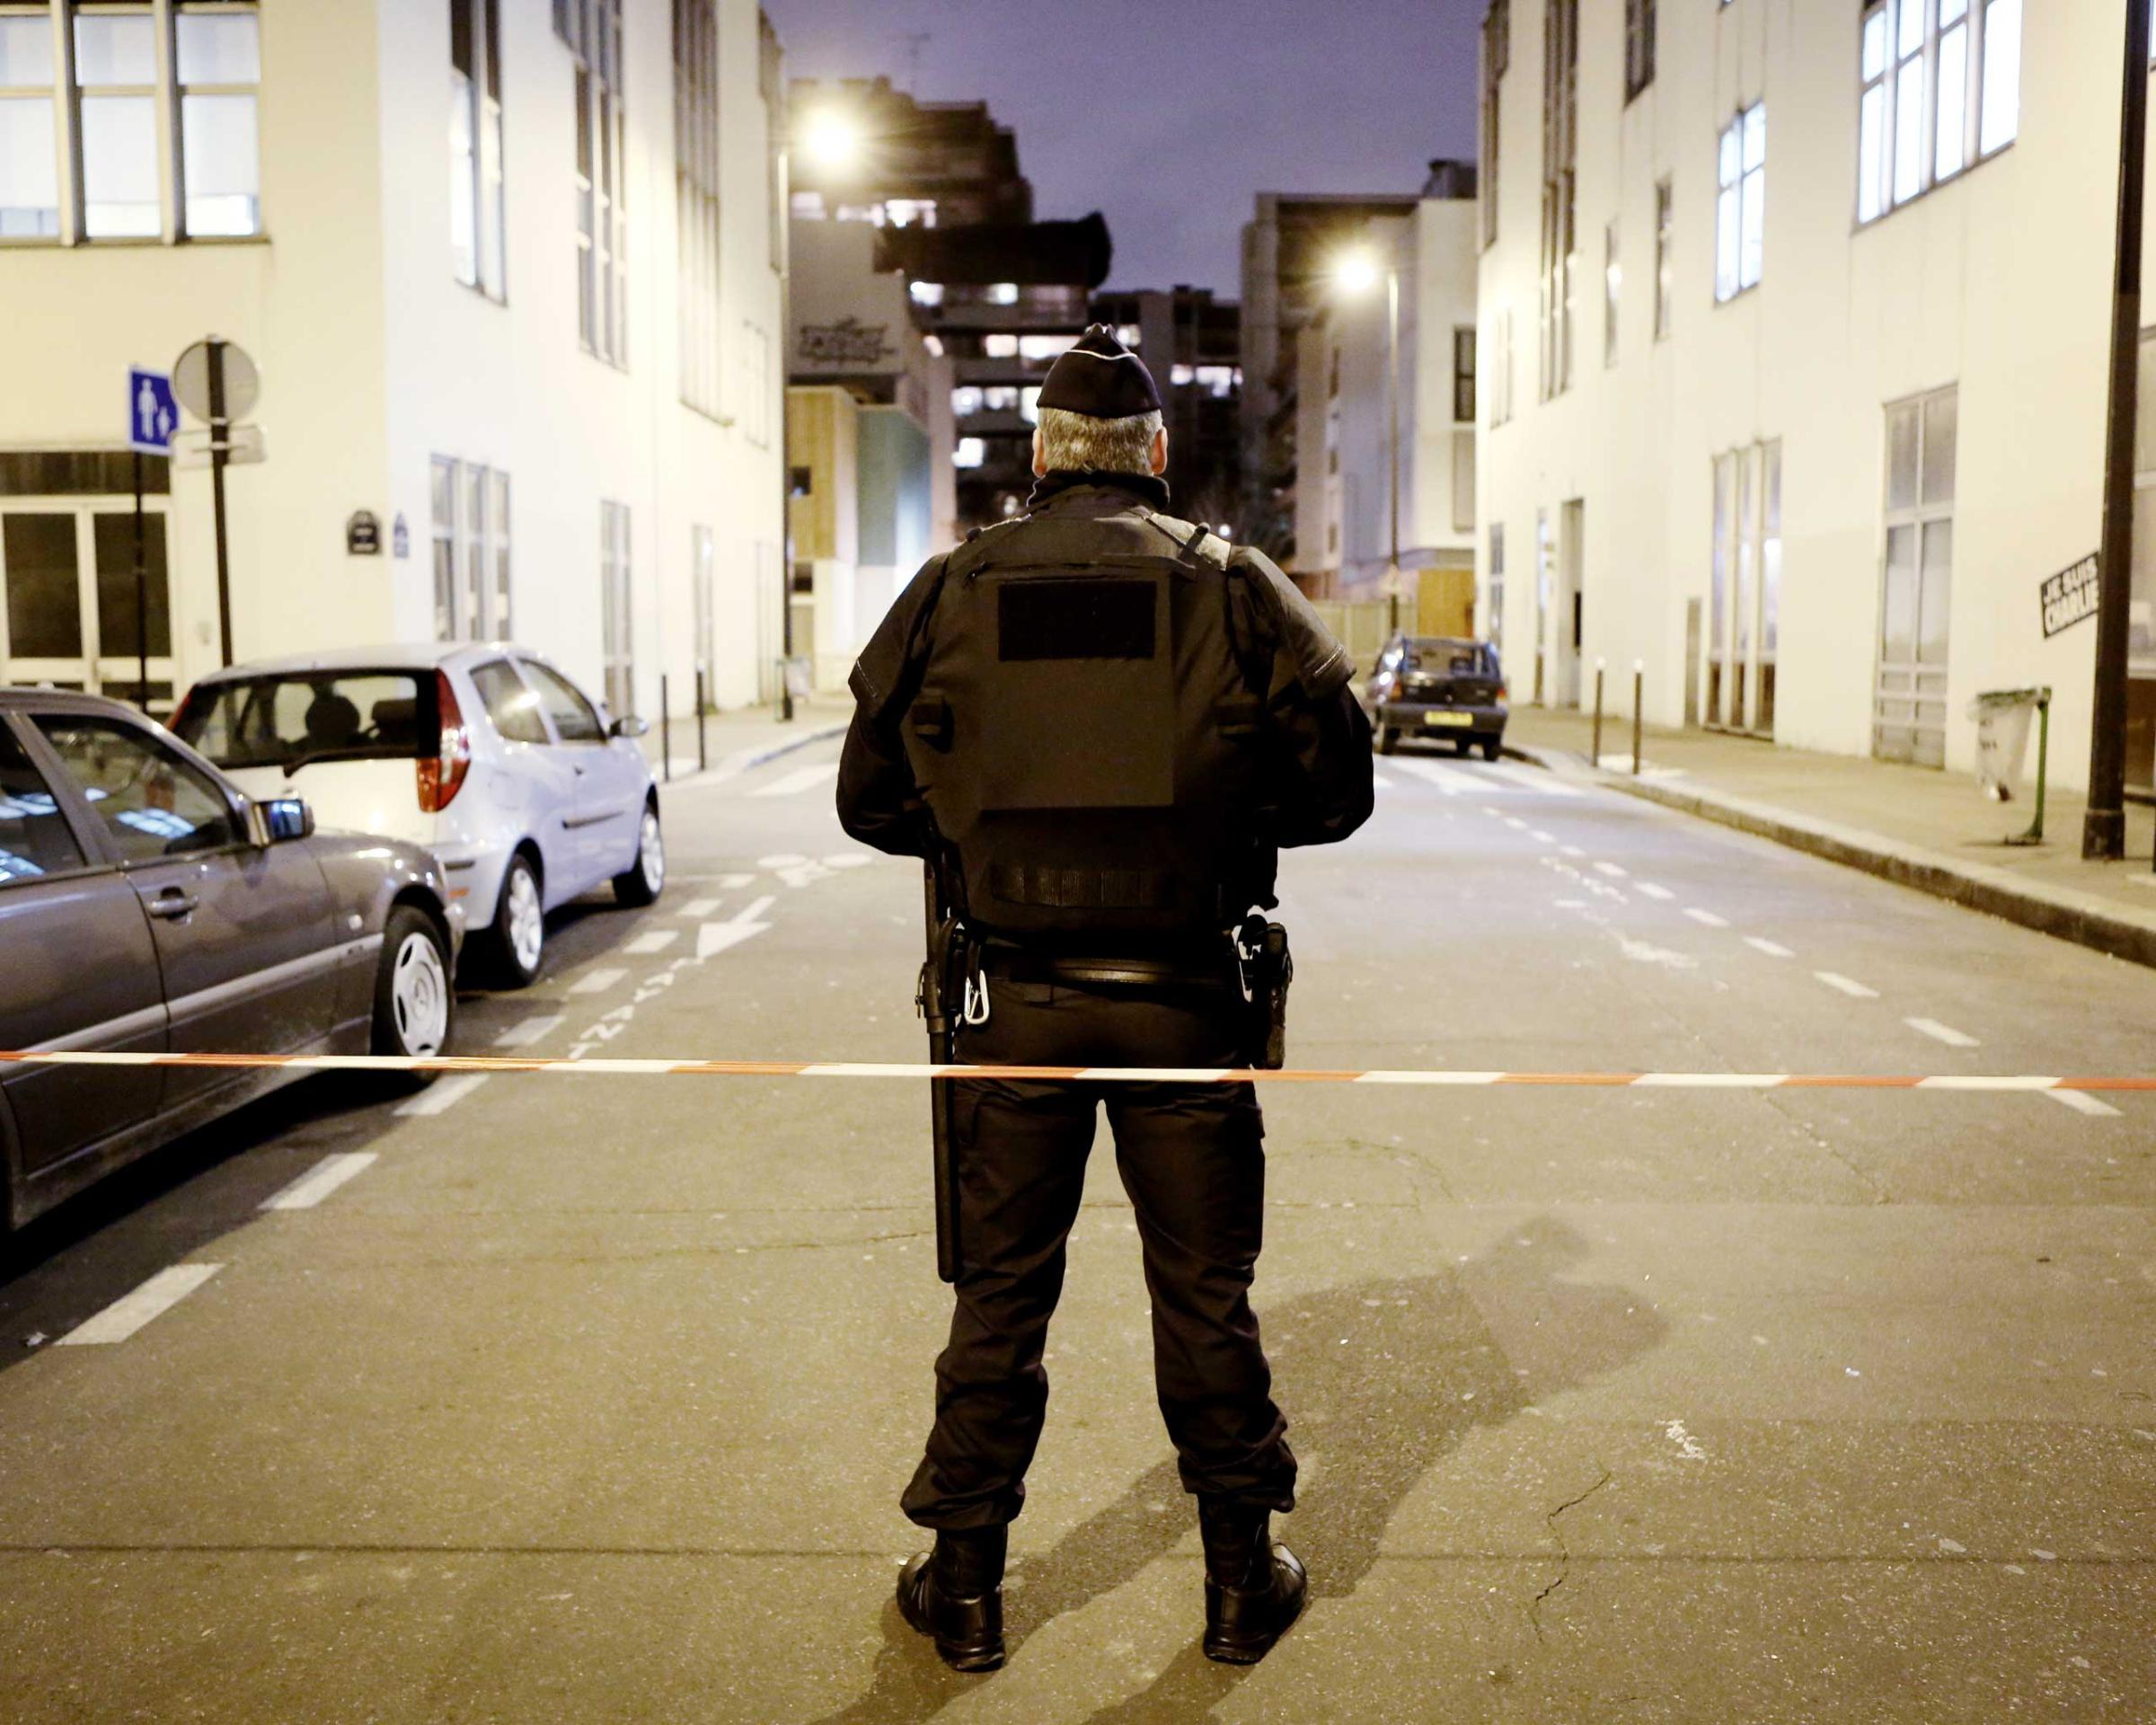 Police guard the area near the Charlie Hebdo offices, as Paris remains on alert after the killings, Jan. 12, 2015.